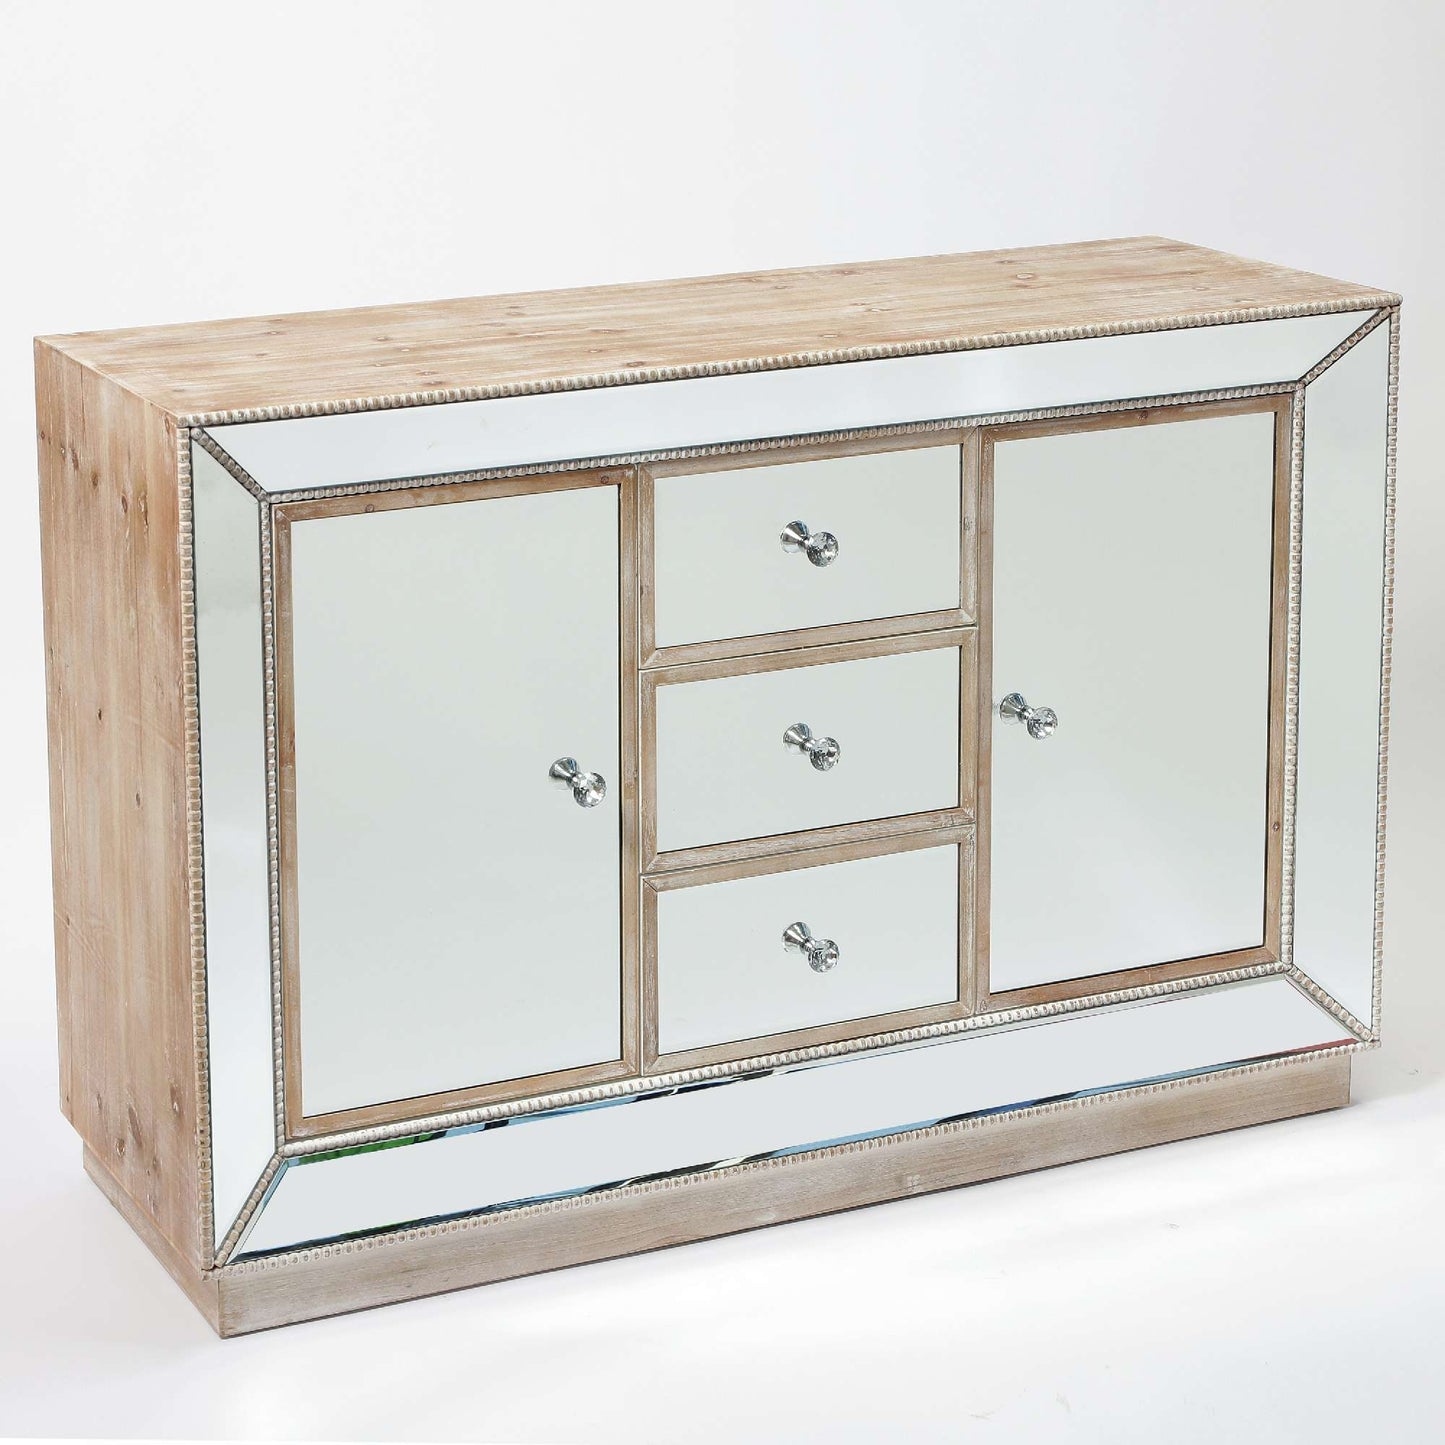 Pearl Mirrored Sideboard Cabinet